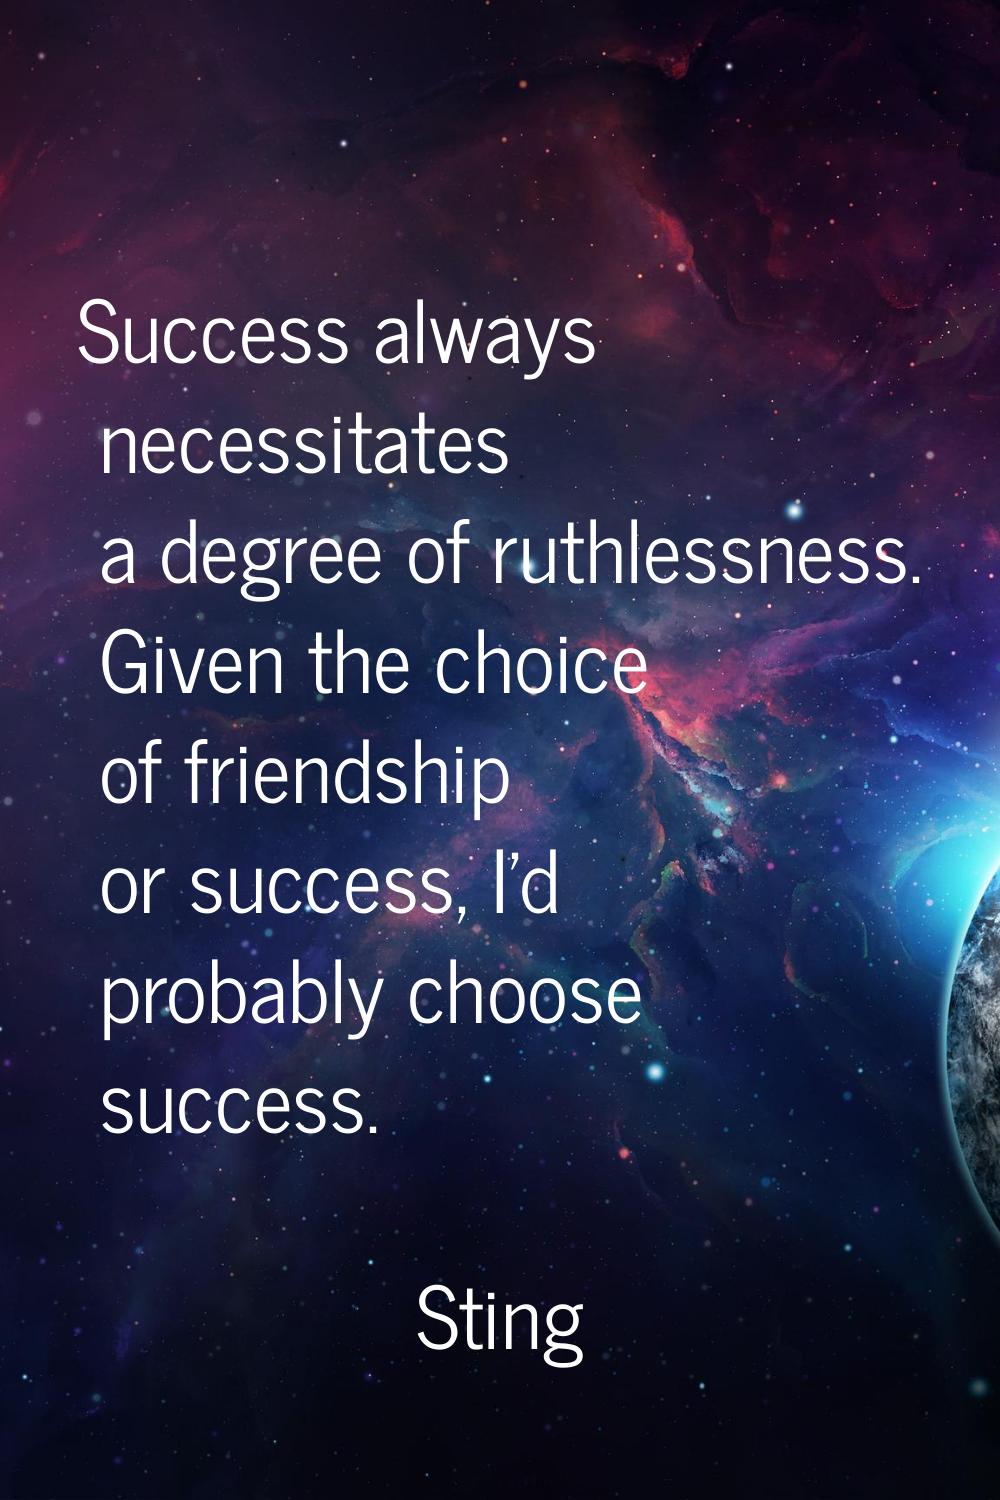 Success always necessitates a degree of ruthlessness. Given the choice of friendship or success, I'